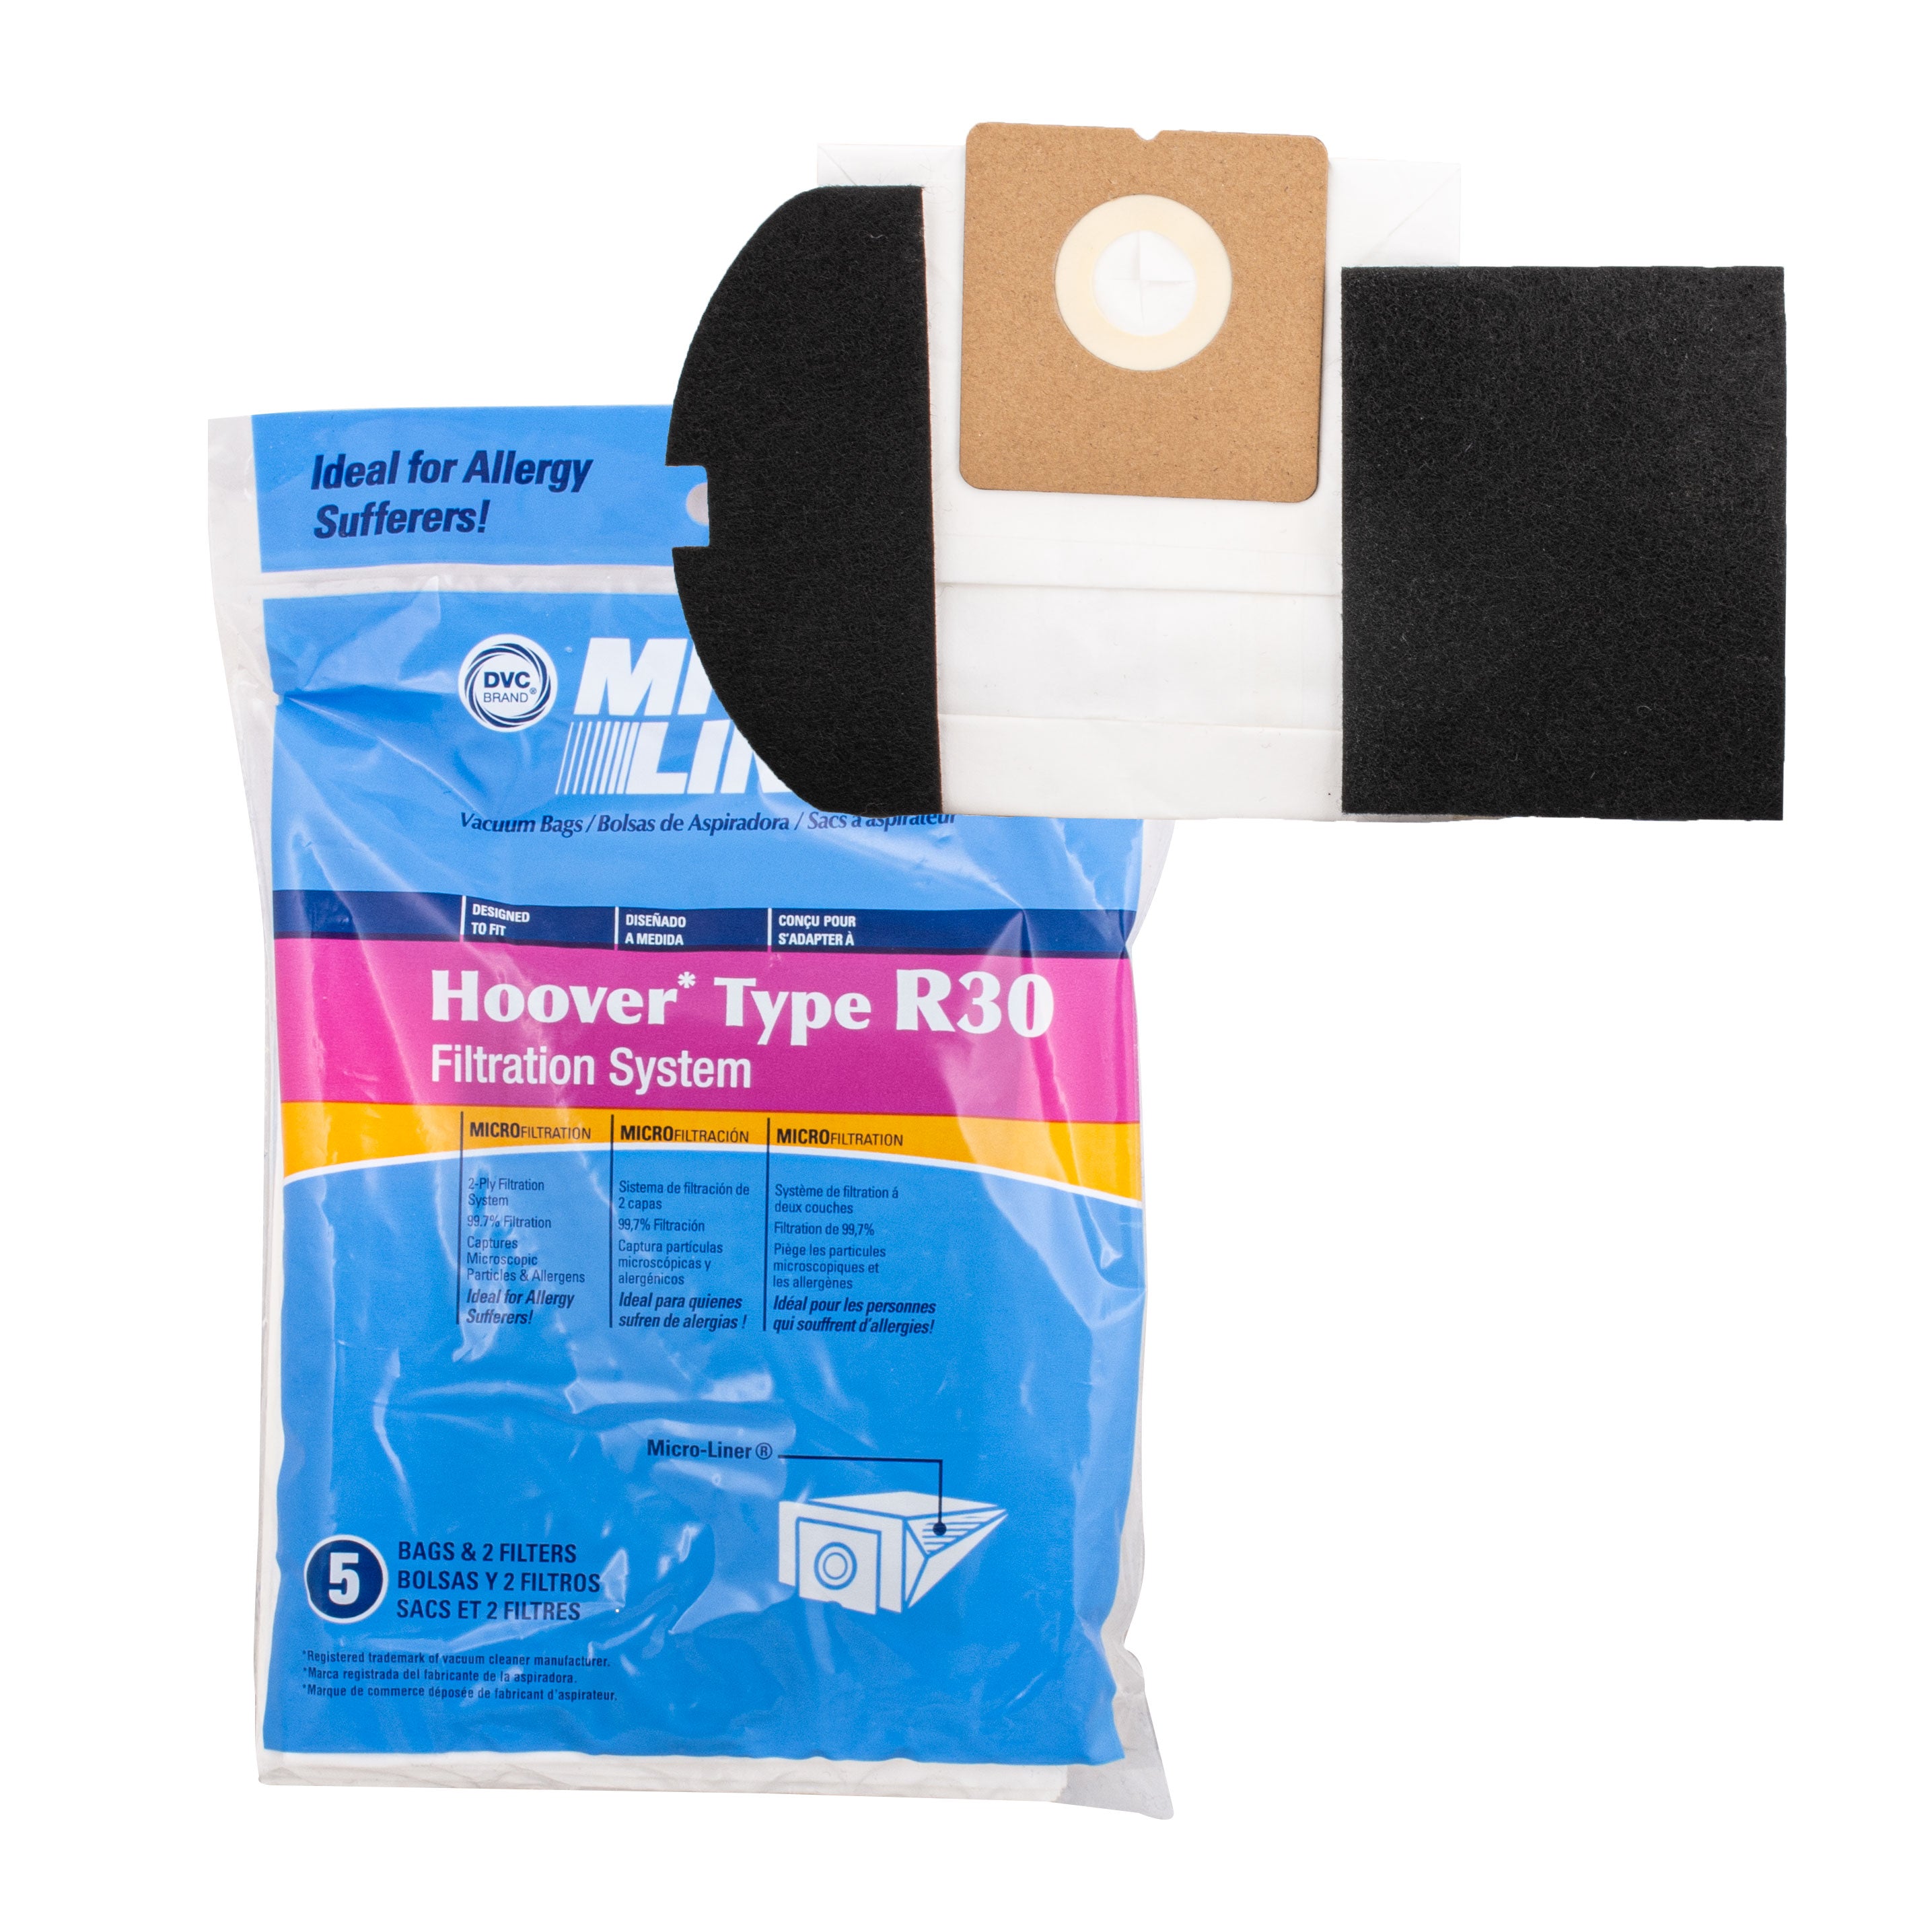 Johnny Vac Prima Replacement Bags 300  5 Bags 2 filters Hoover R30